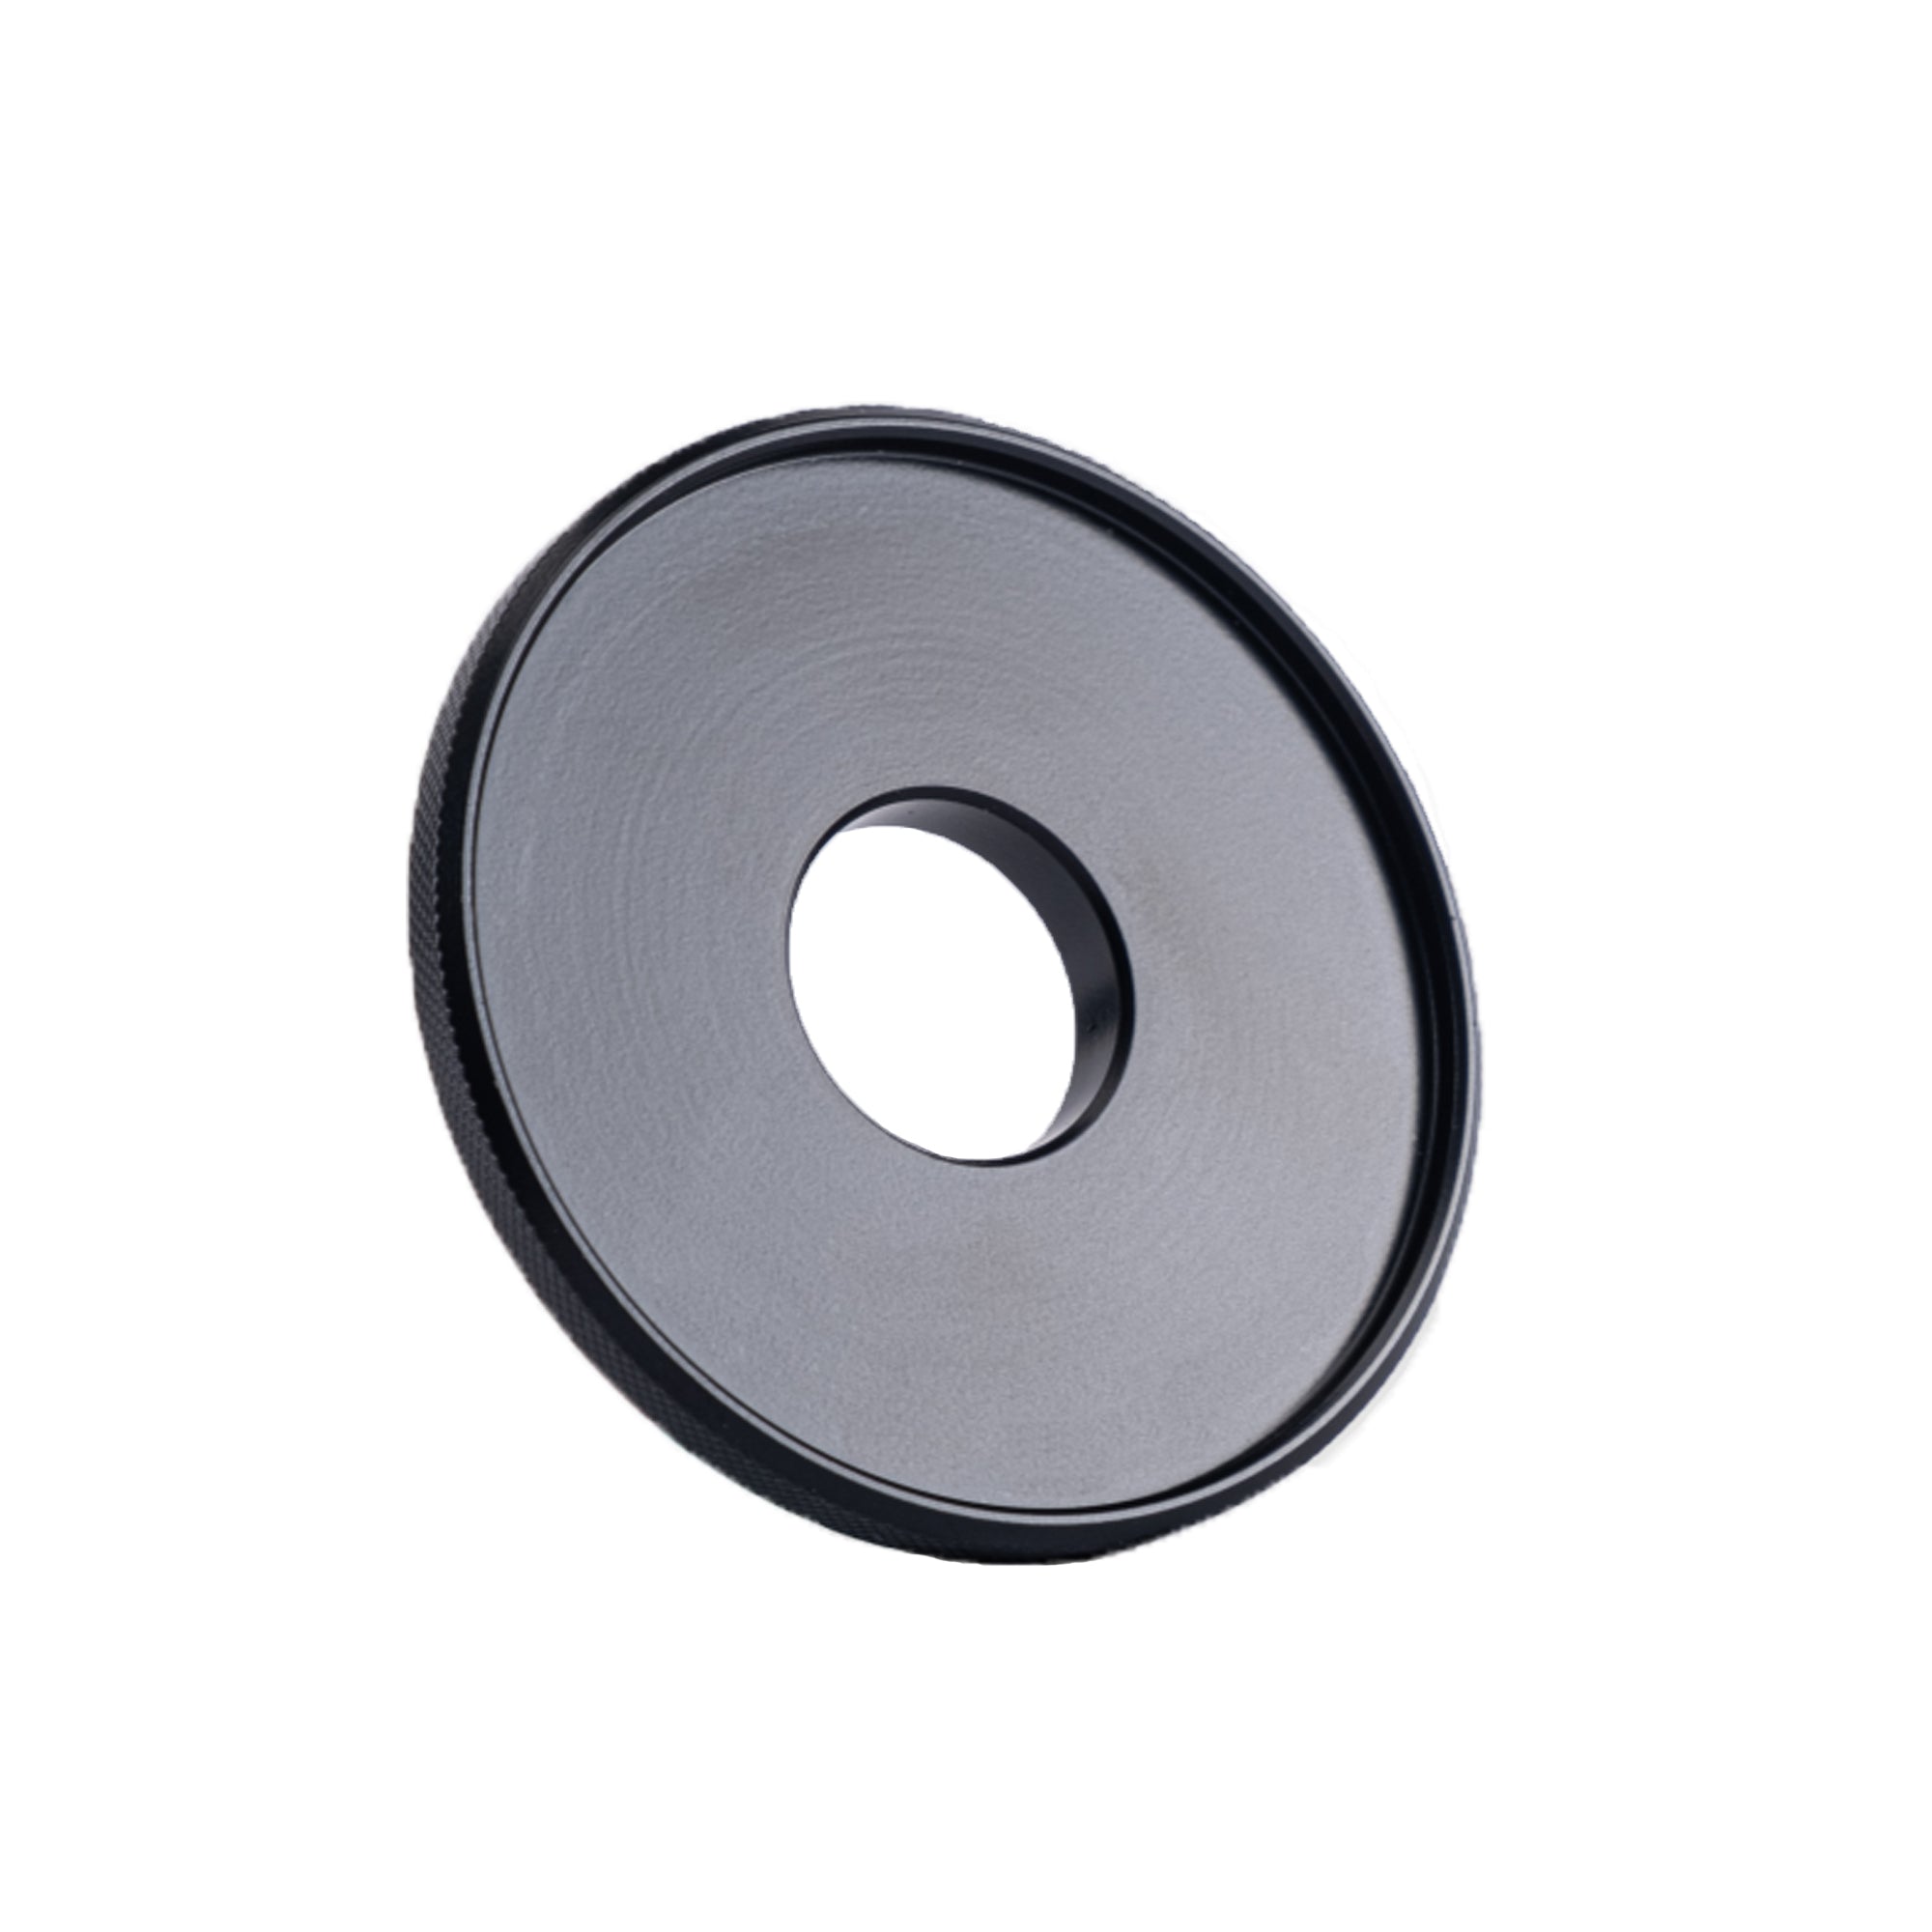 Kase M17 Smartphone Filter Magnetic Adapter Ring | 41mm Diameter | Suitable for Circular Magnetic Filters